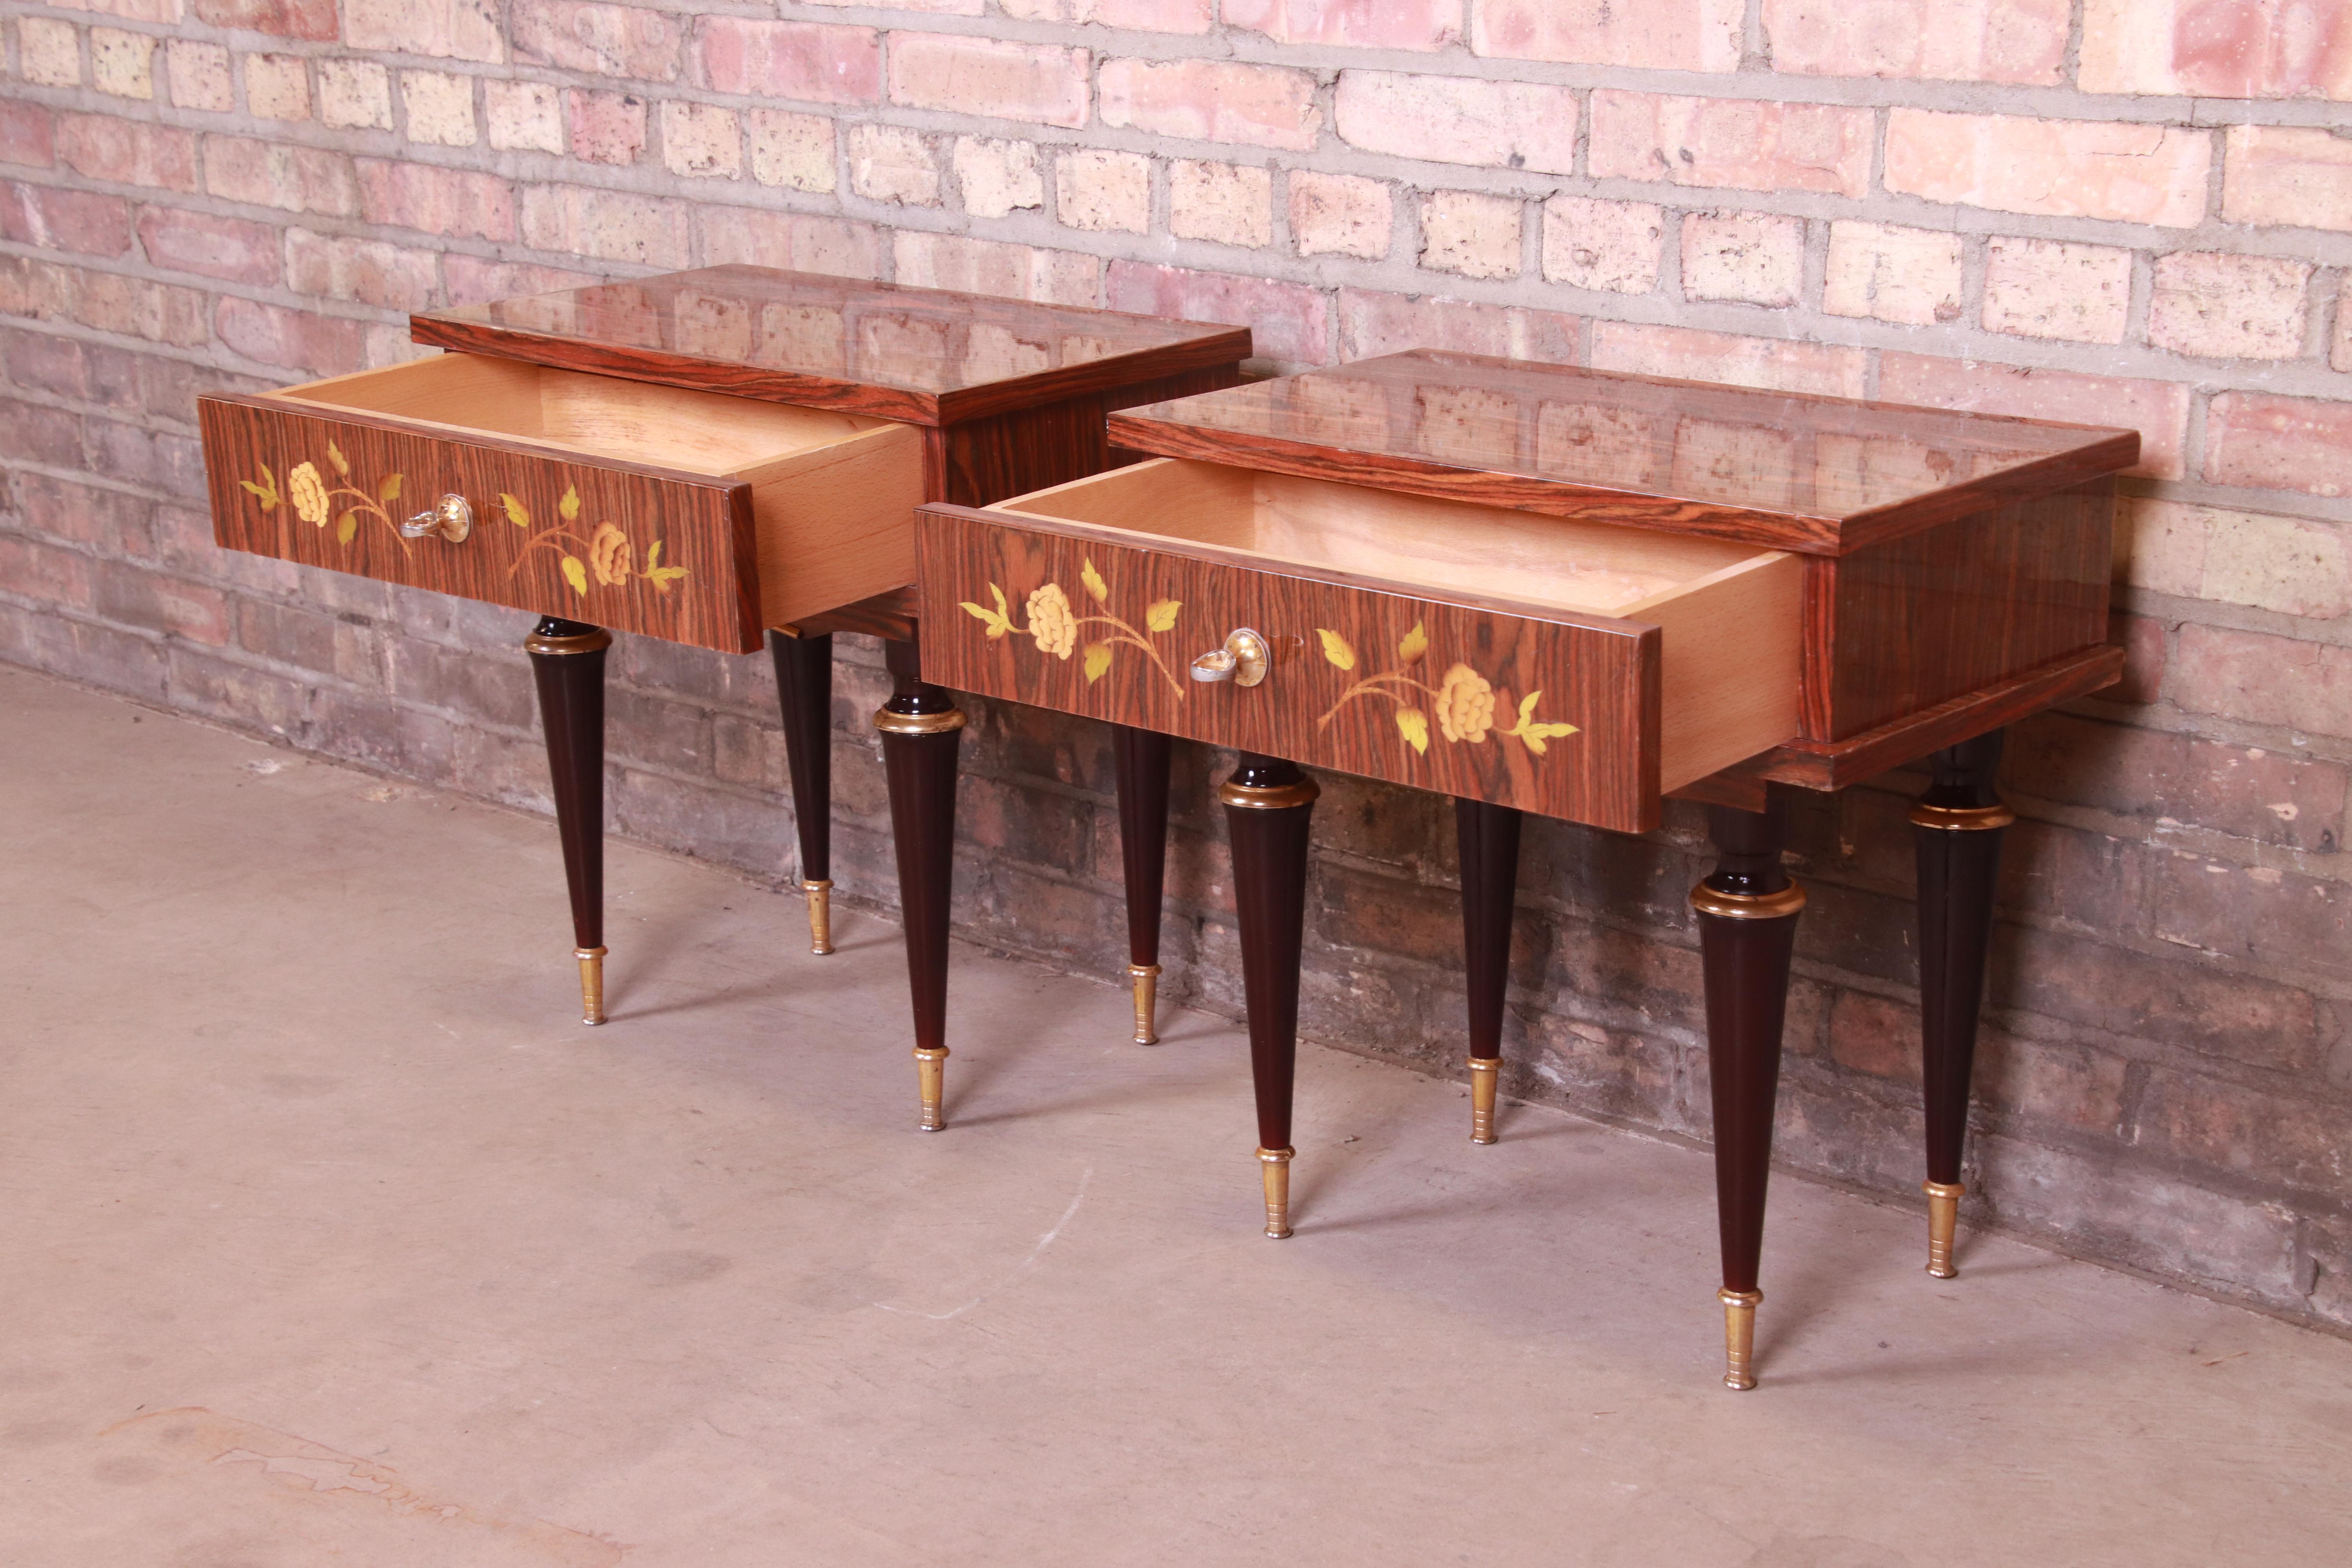 French Art Deco Macassar Ebony Inlaid Marquetry Nightstands, Circa 1950s For Sale 3